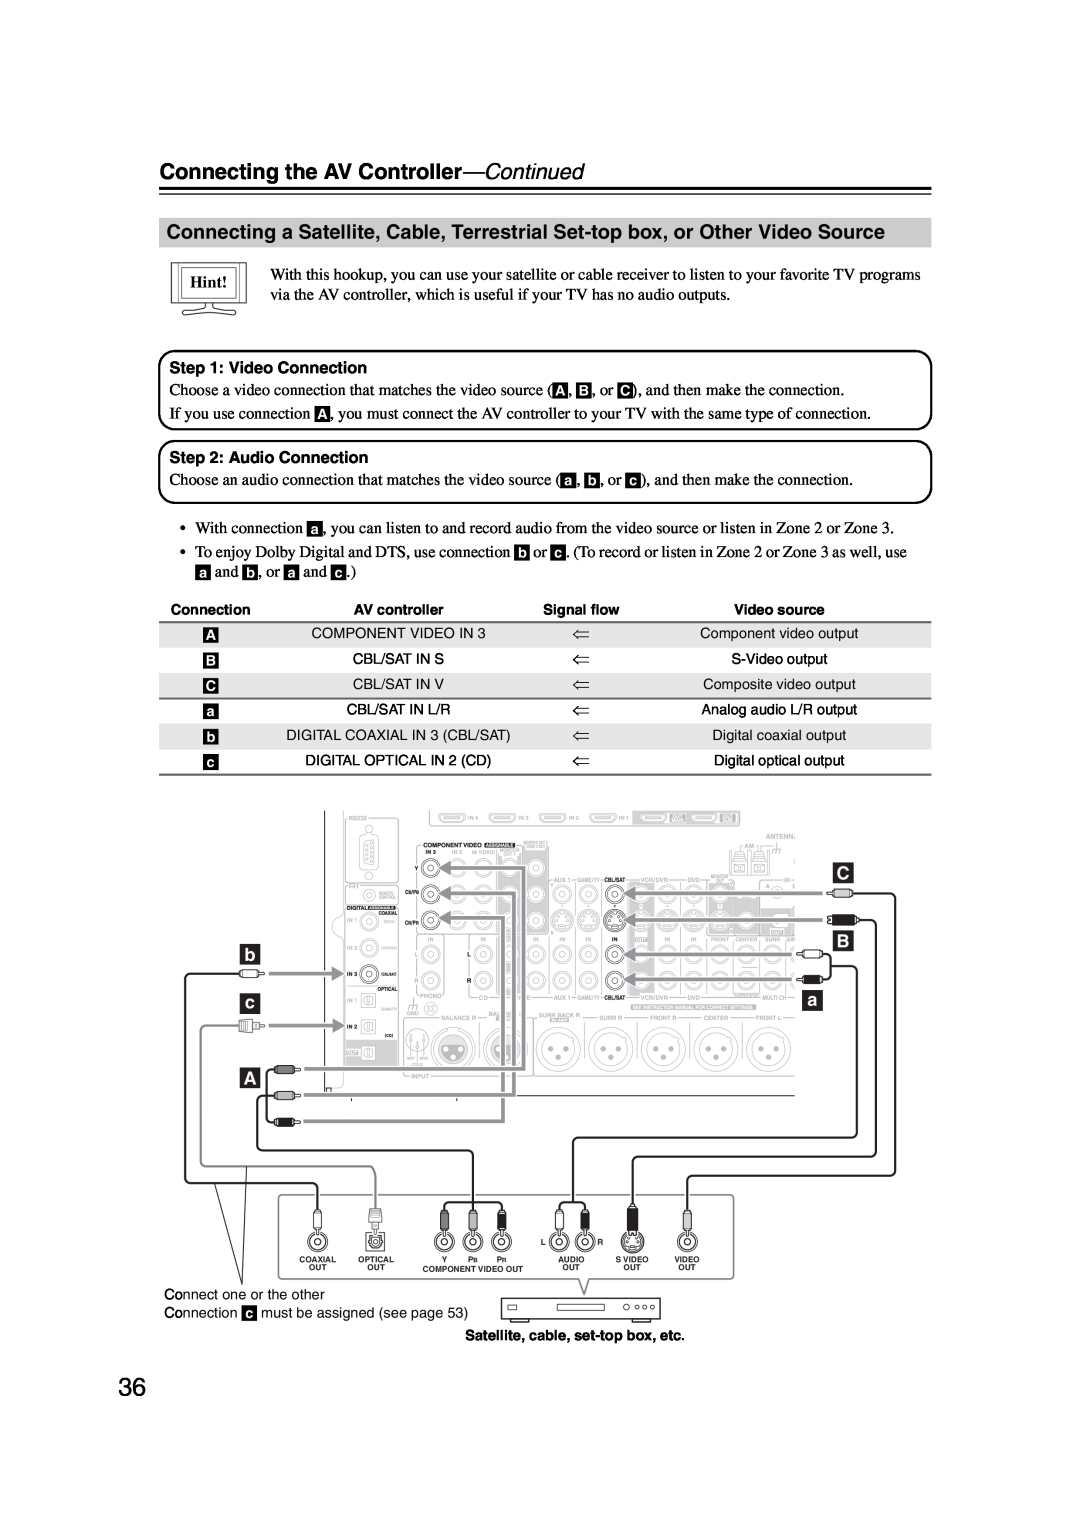 Integra DHC-9.9 instruction manual Connecting the AV Controller—Continued, Hint, Satellite, cable, set-topbox, etc 